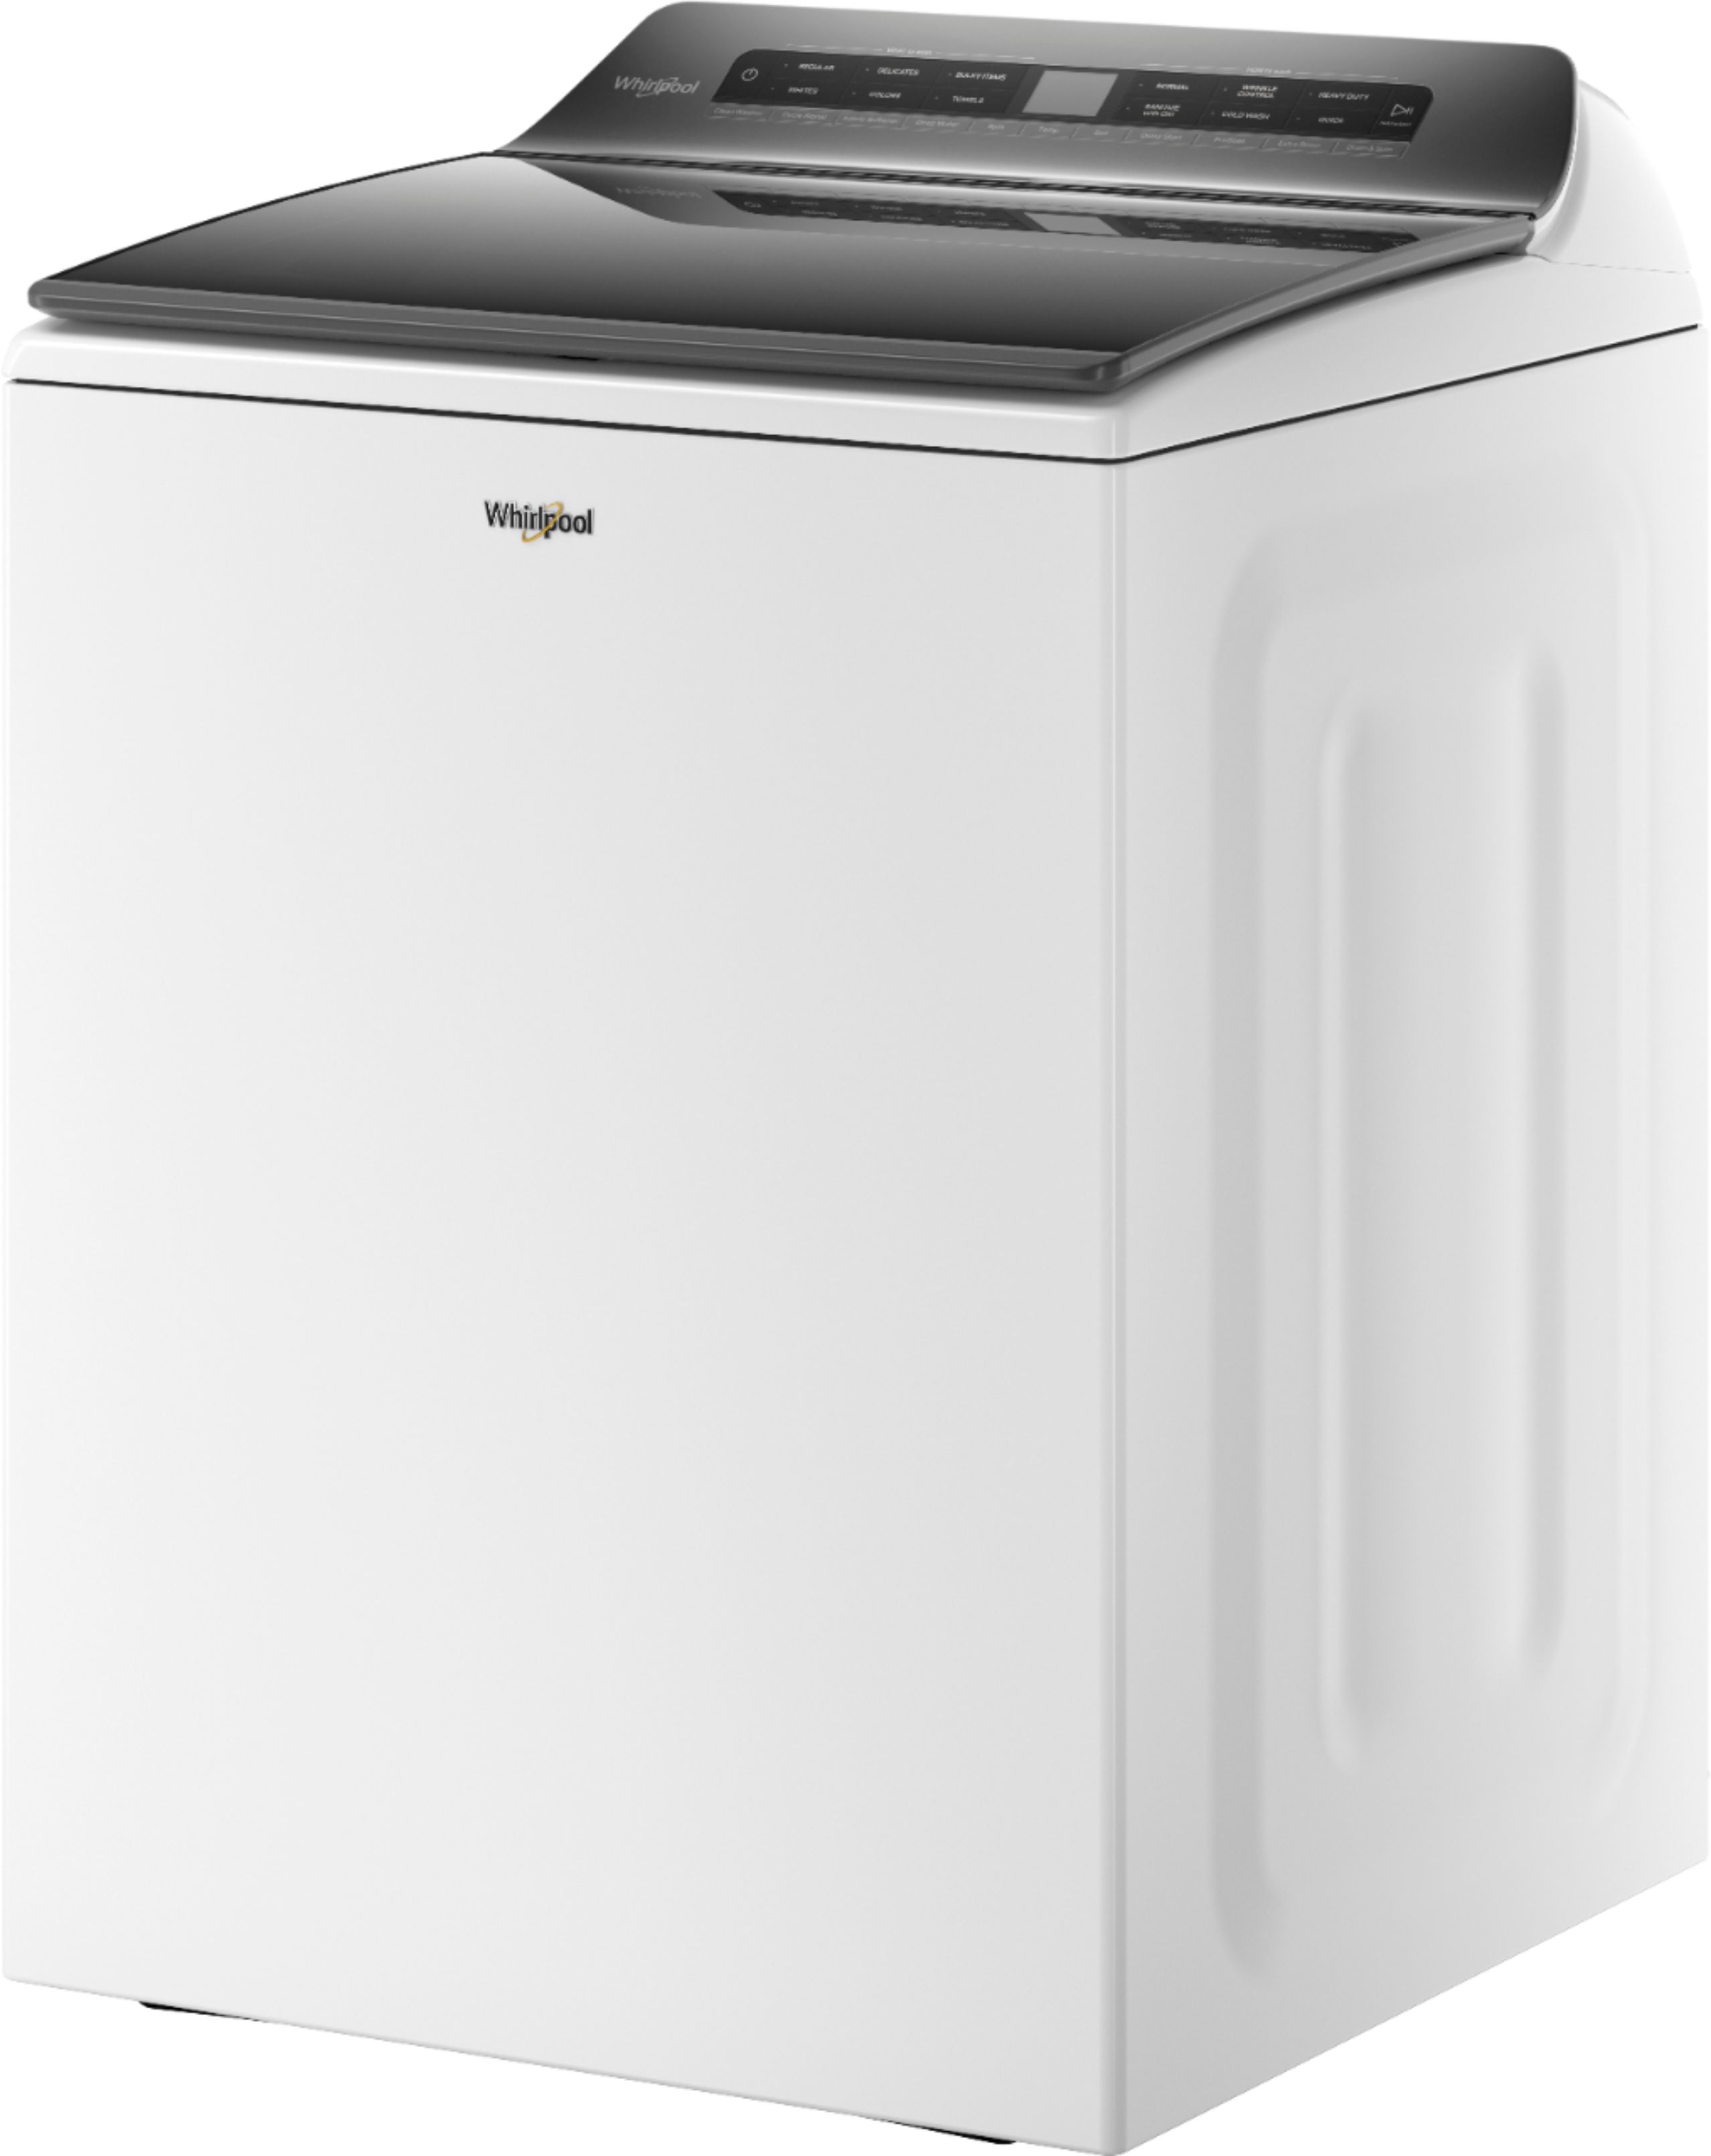 Left View: Samsung - 5.5 cu. ft. Extra-Large Capacity Smart Top Load Washer with Super Speed Wash - Ivory